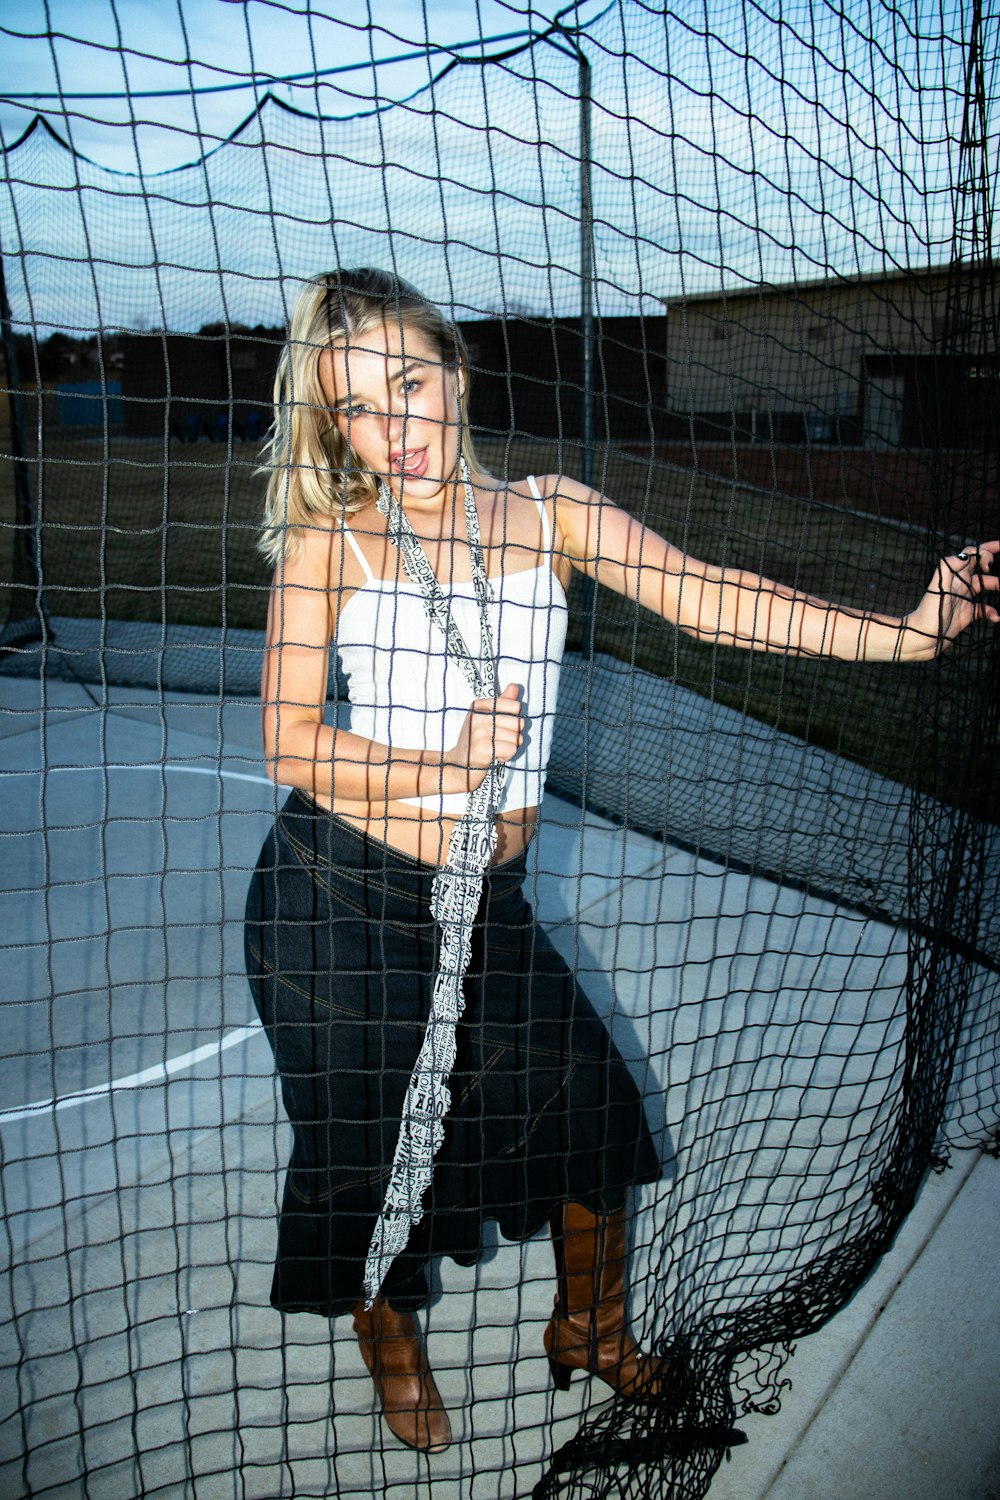 a woman standing in front of a net holding a tennis racquet